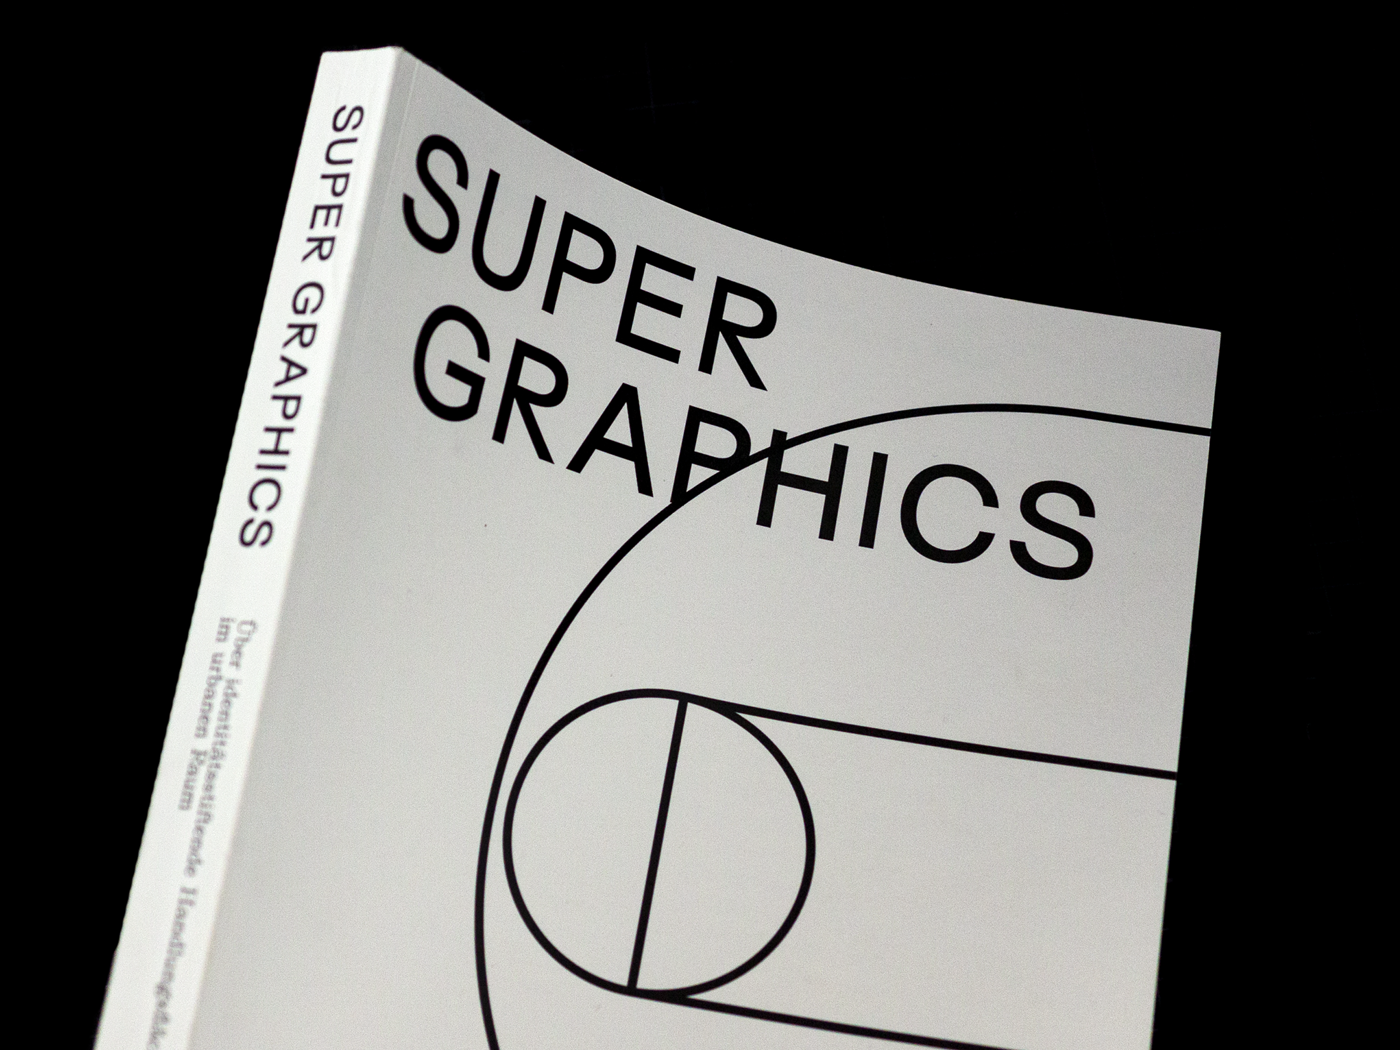 Supergraphics Call for Creatives